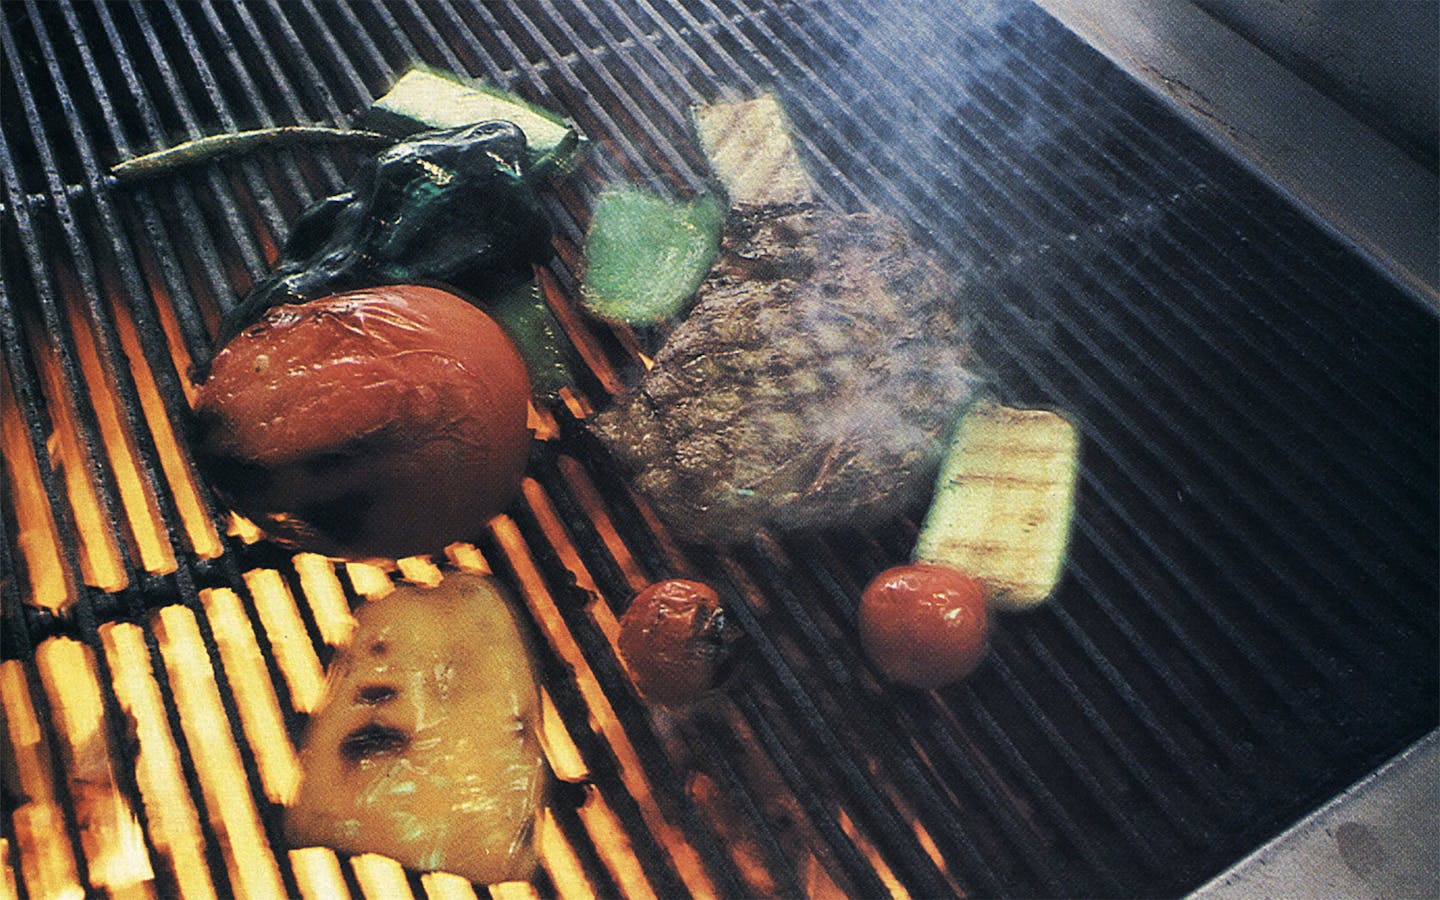 What's the Big Deal About Grills? – Texas Monthly